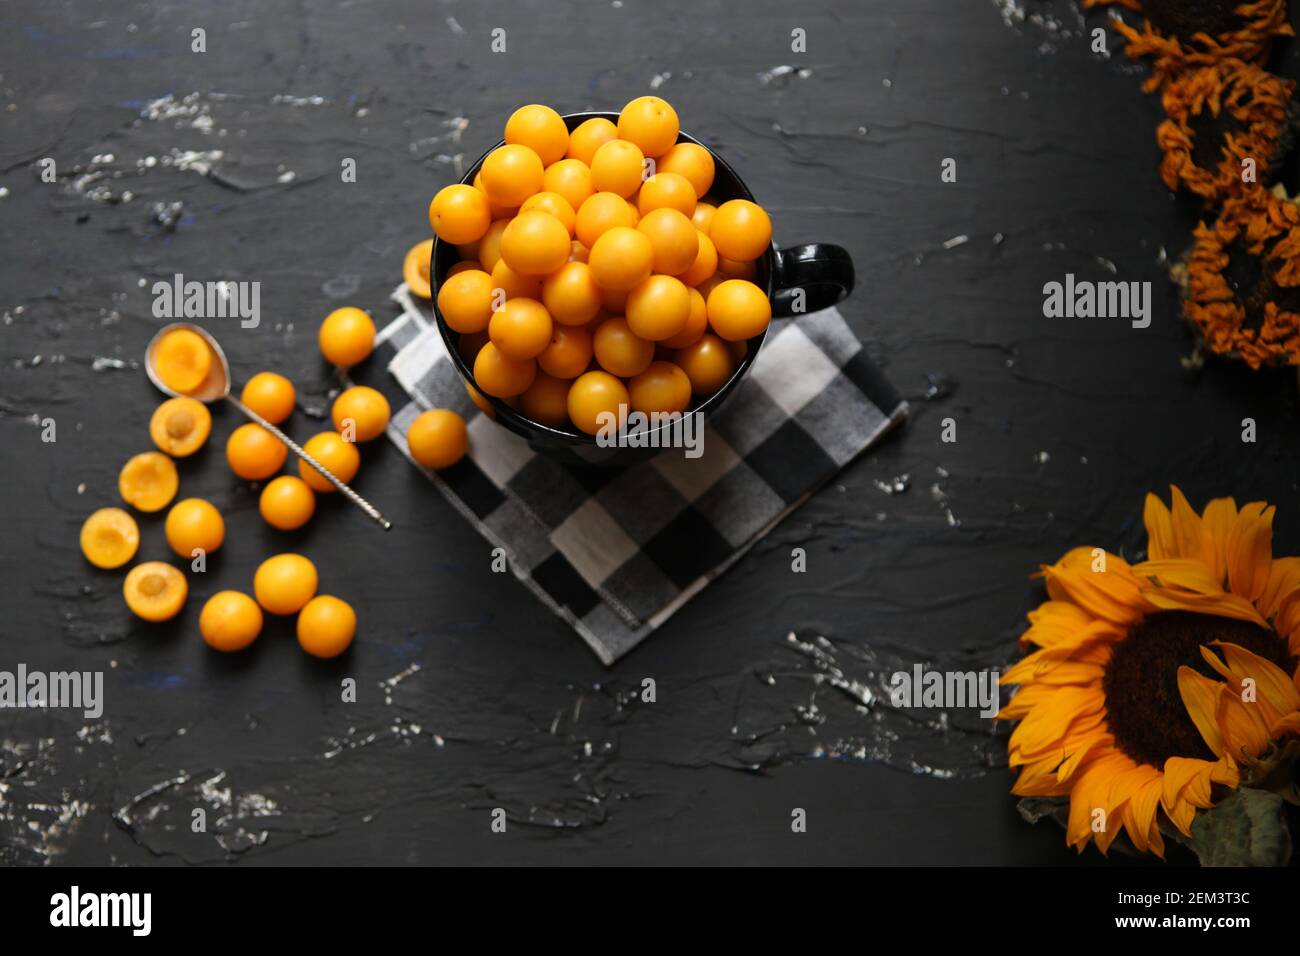 Yellow plums on the black background. Ingredients for a jam. Food photography. Yellow sunflower, top view. Autumn Concept, Stock Photo